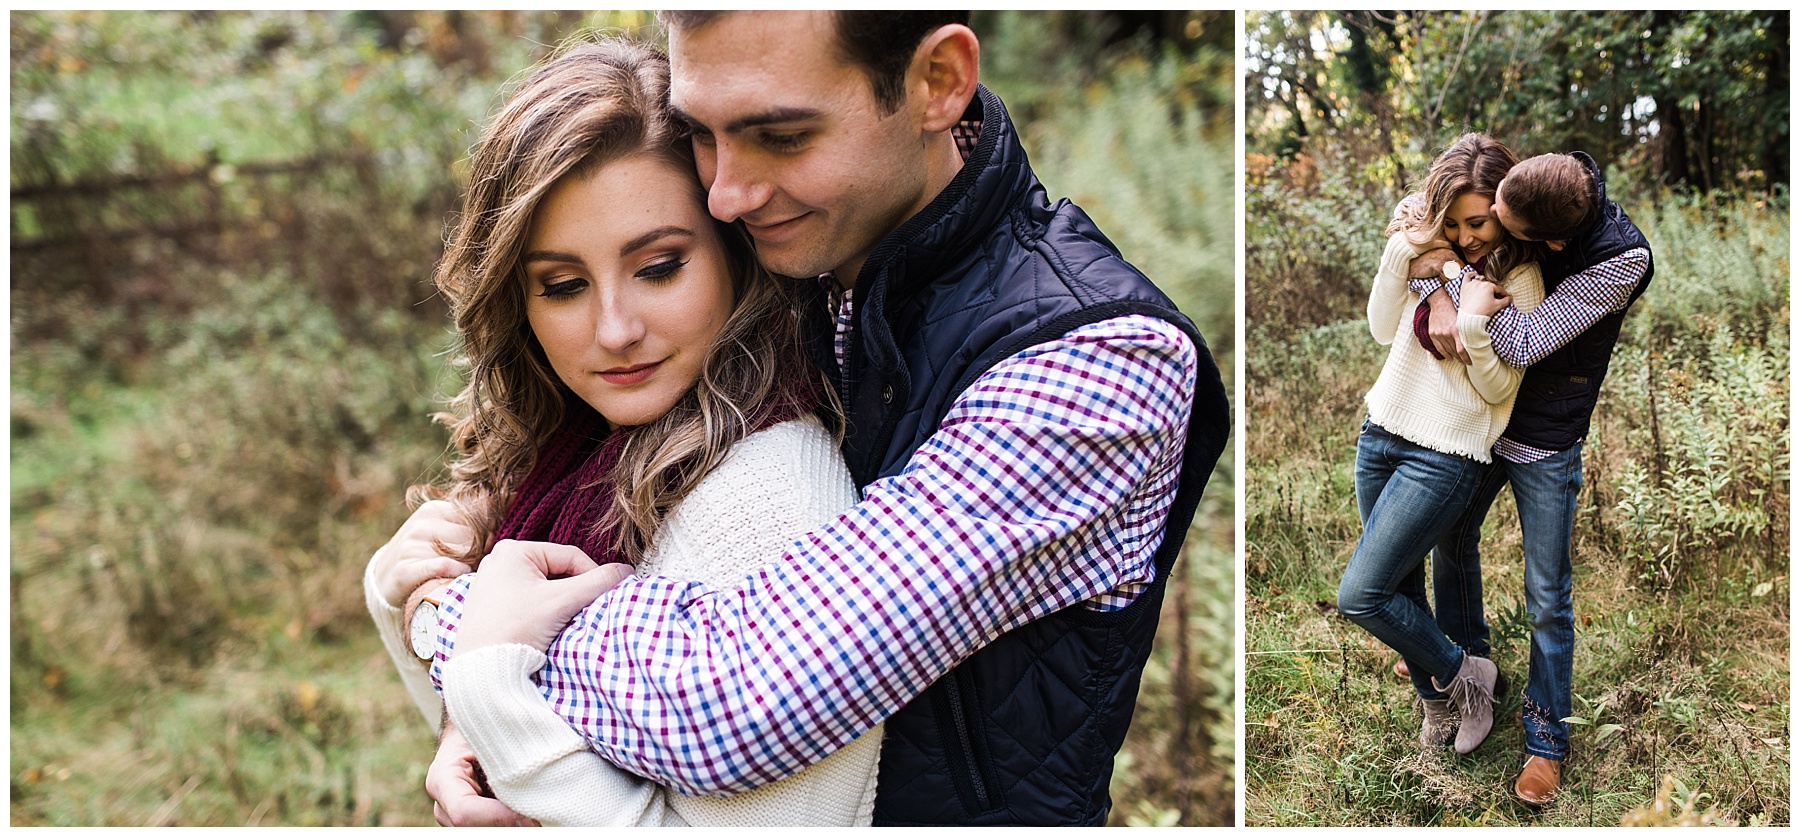 Youngstown Engagement Session_Mill Creek Park_L.A.R. Weddings